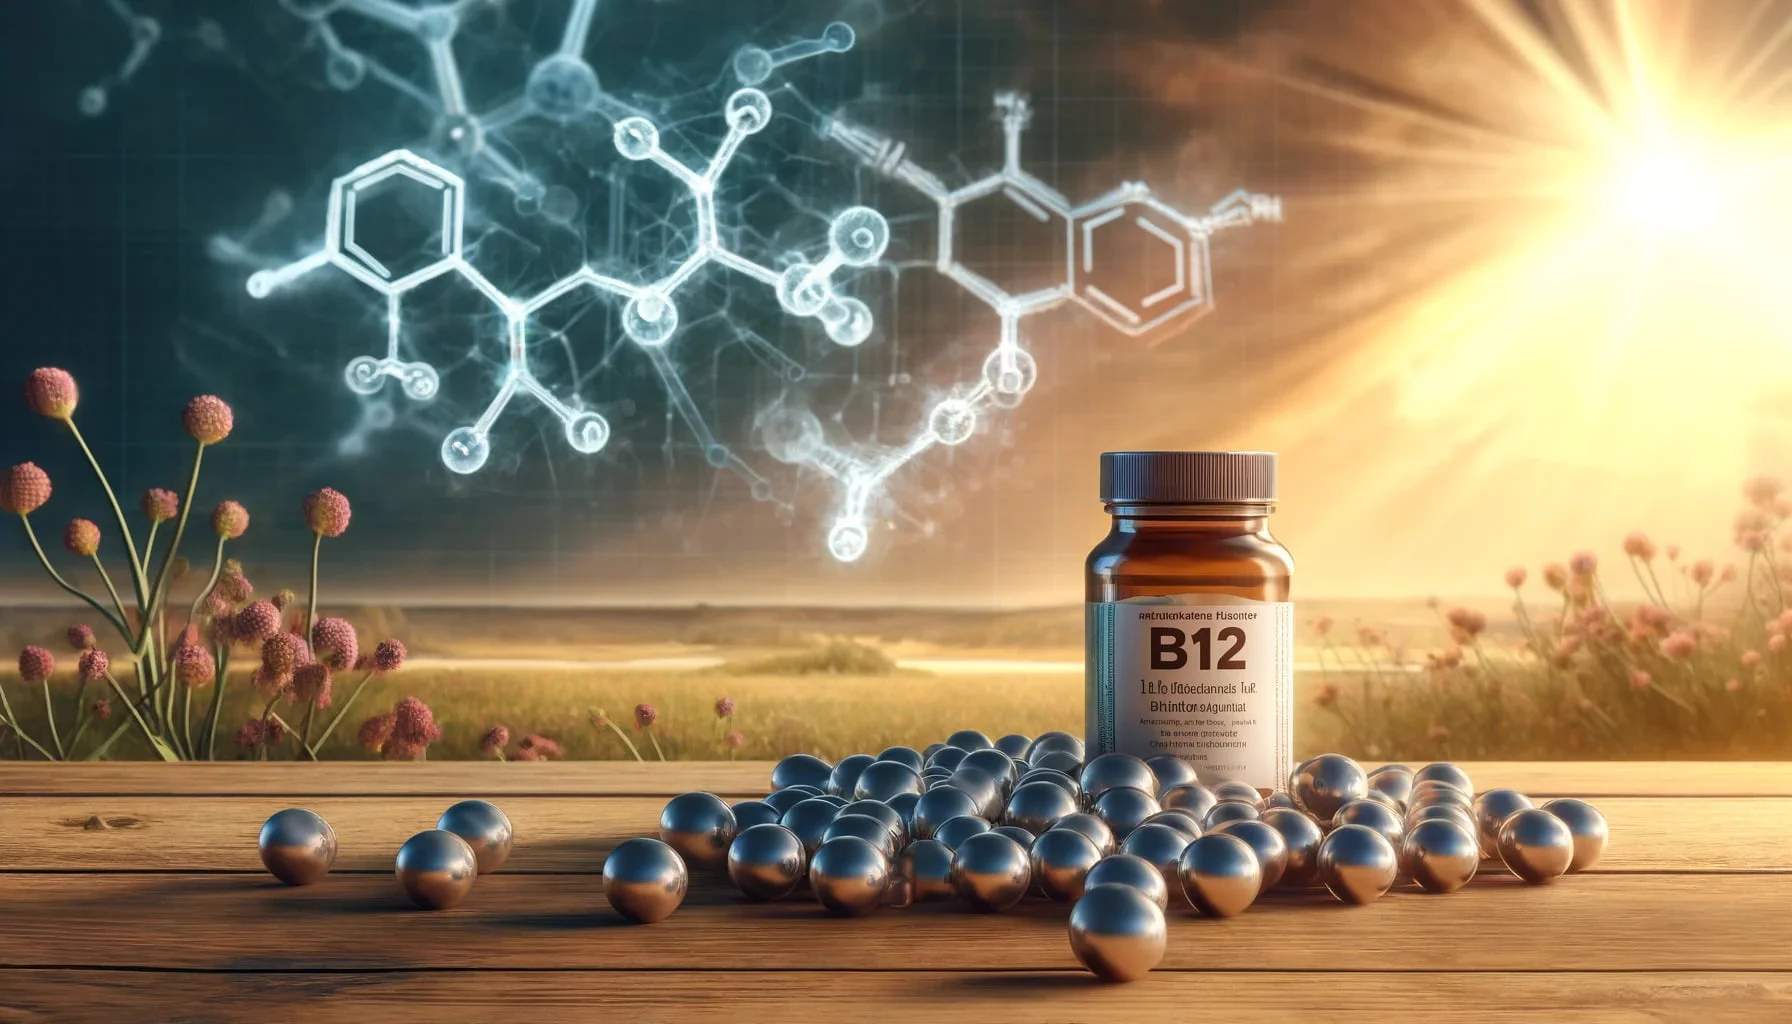 A photorealistic image of vitamin b12 with its molecular structure.